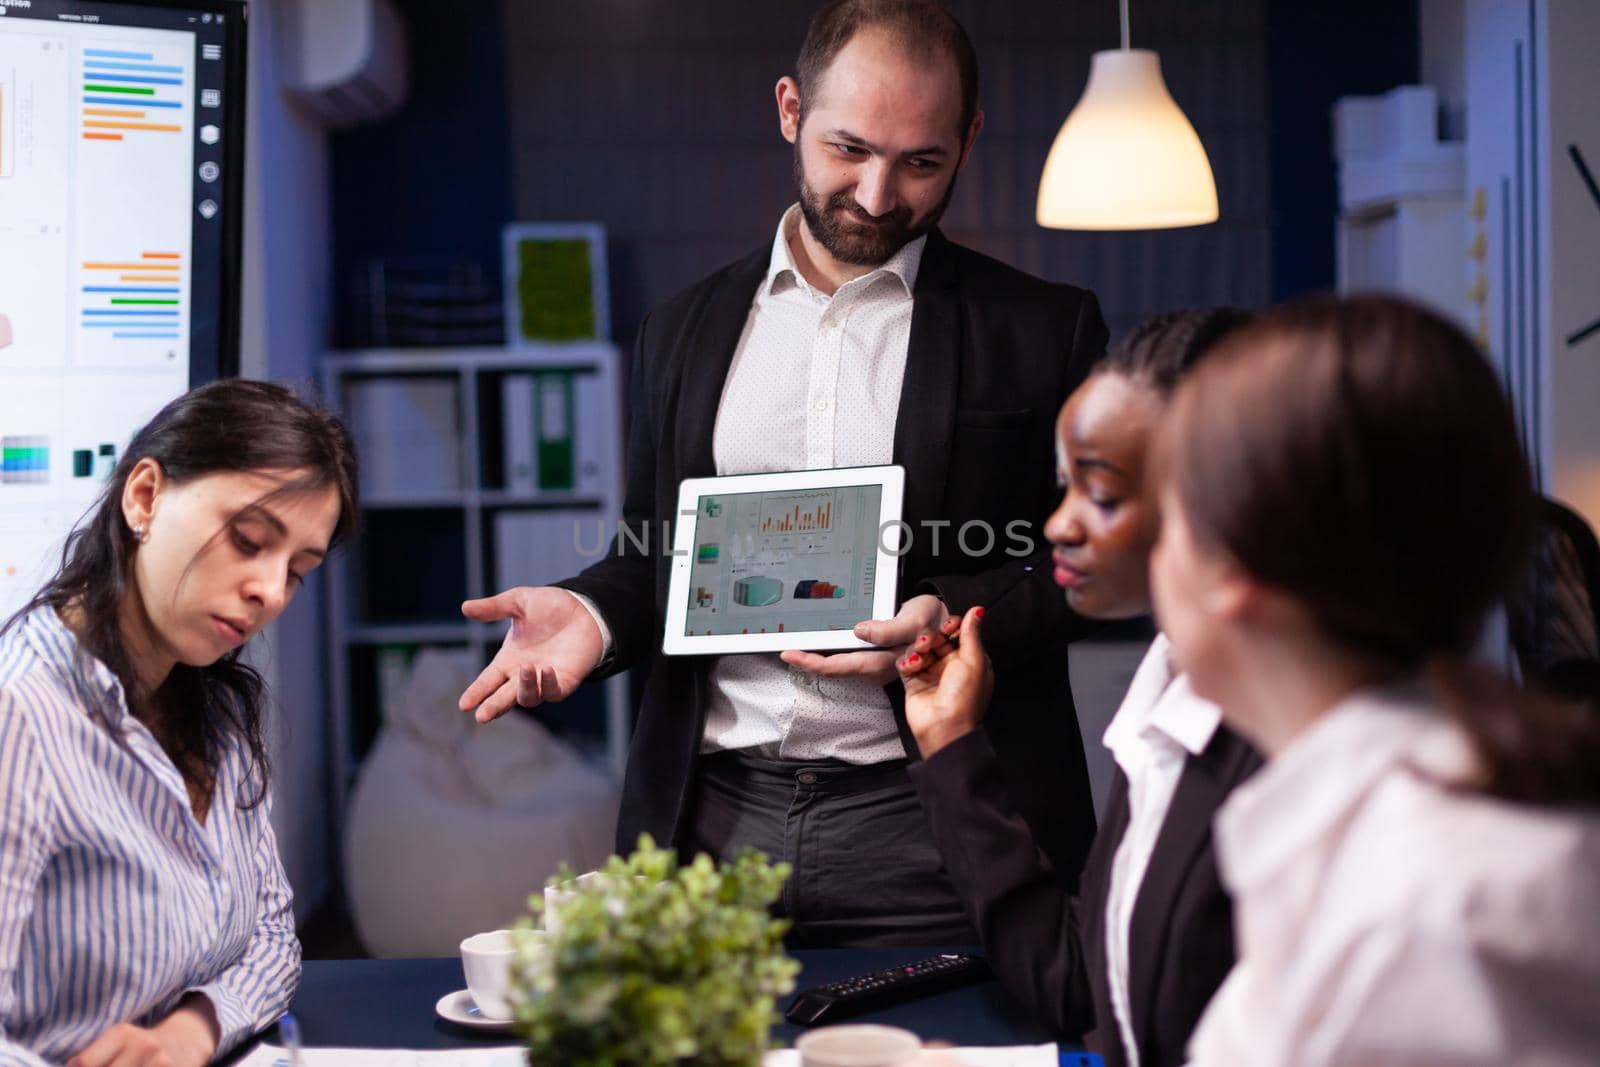 Focused workaholic entrepreneur man working overtime presenting company statistics using tablet. Diverse multi-ethnic businesspeople overworking in office meeting room late at night.